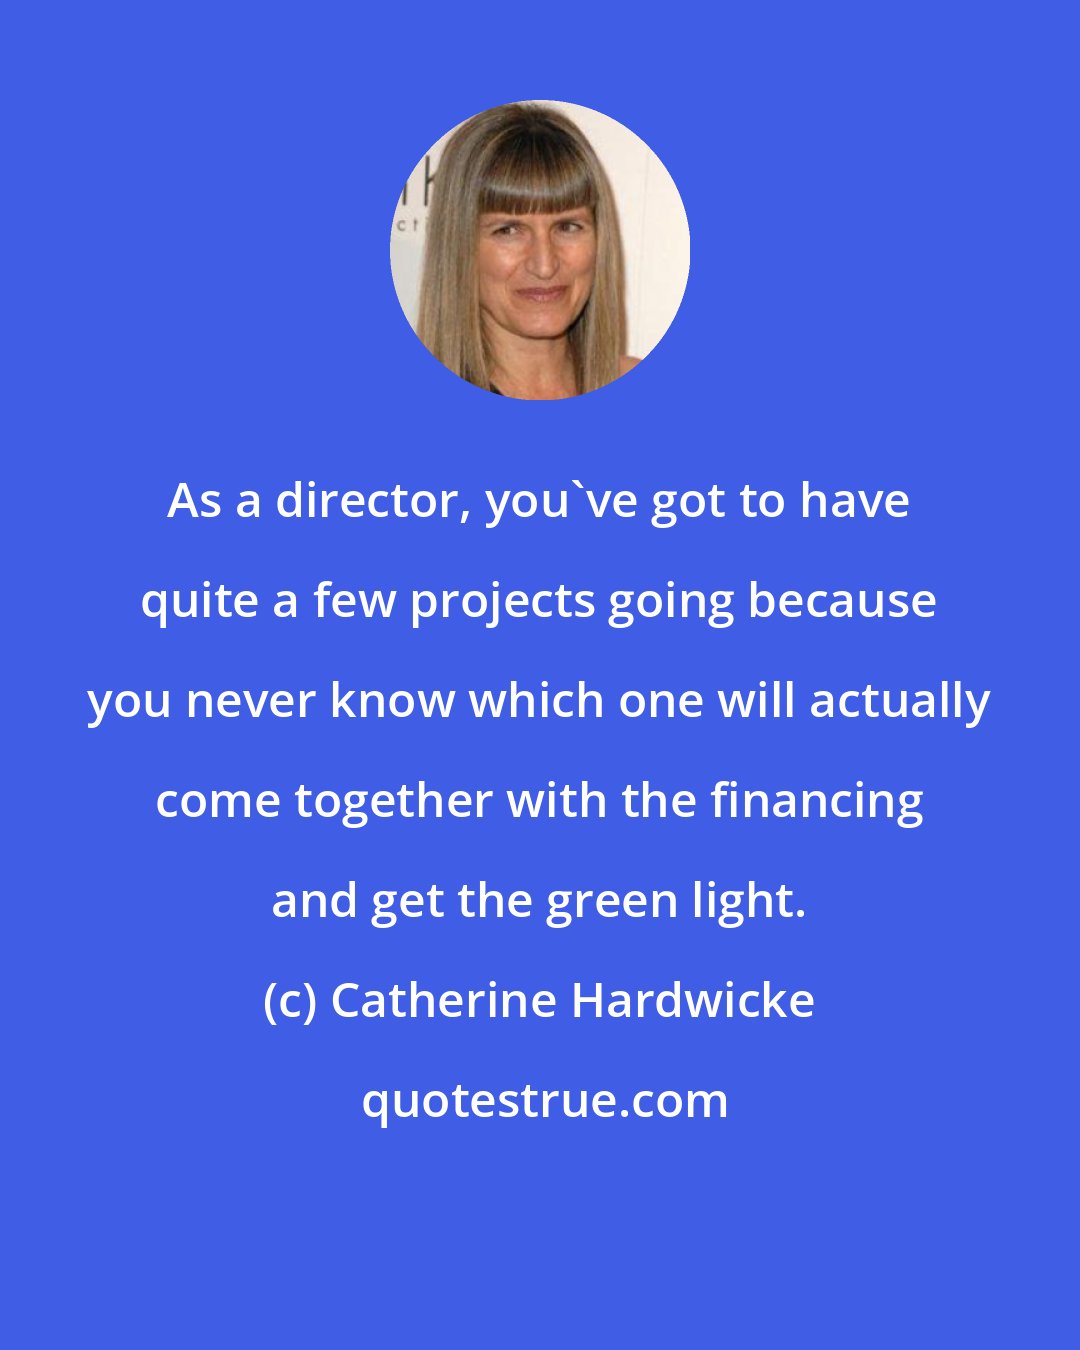 Catherine Hardwicke: As a director, you've got to have quite a few projects going because you never know which one will actually come together with the financing and get the green light.